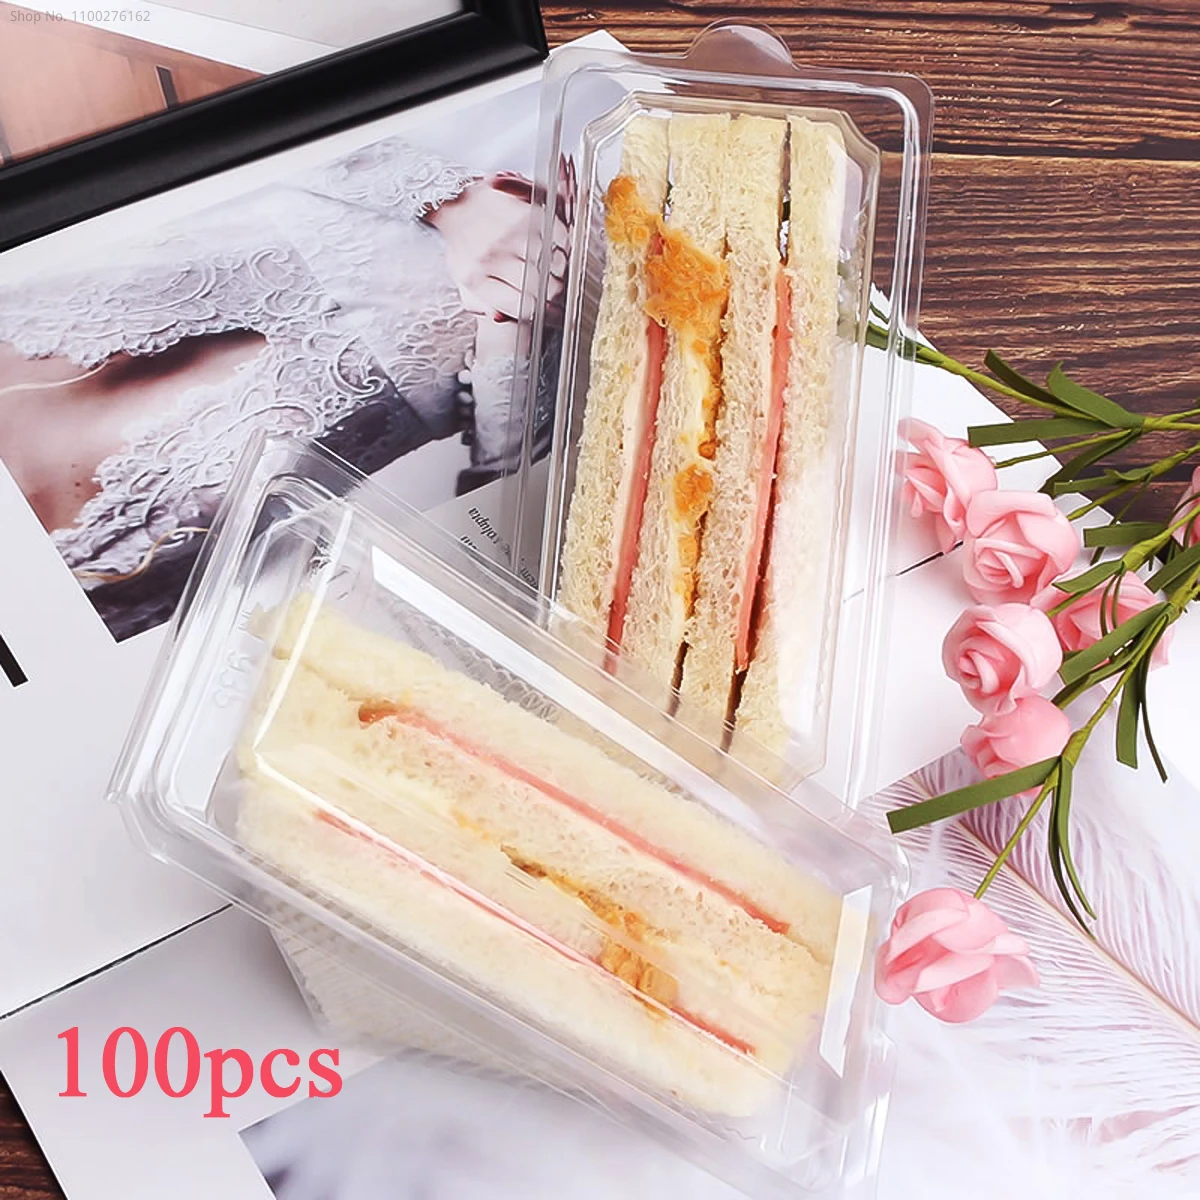 

100pcs Sandwich Box Portable Disposable Plastic Baking Packing Box For Cake Box Wedding Party Food Takeout Box Packaging Boxes